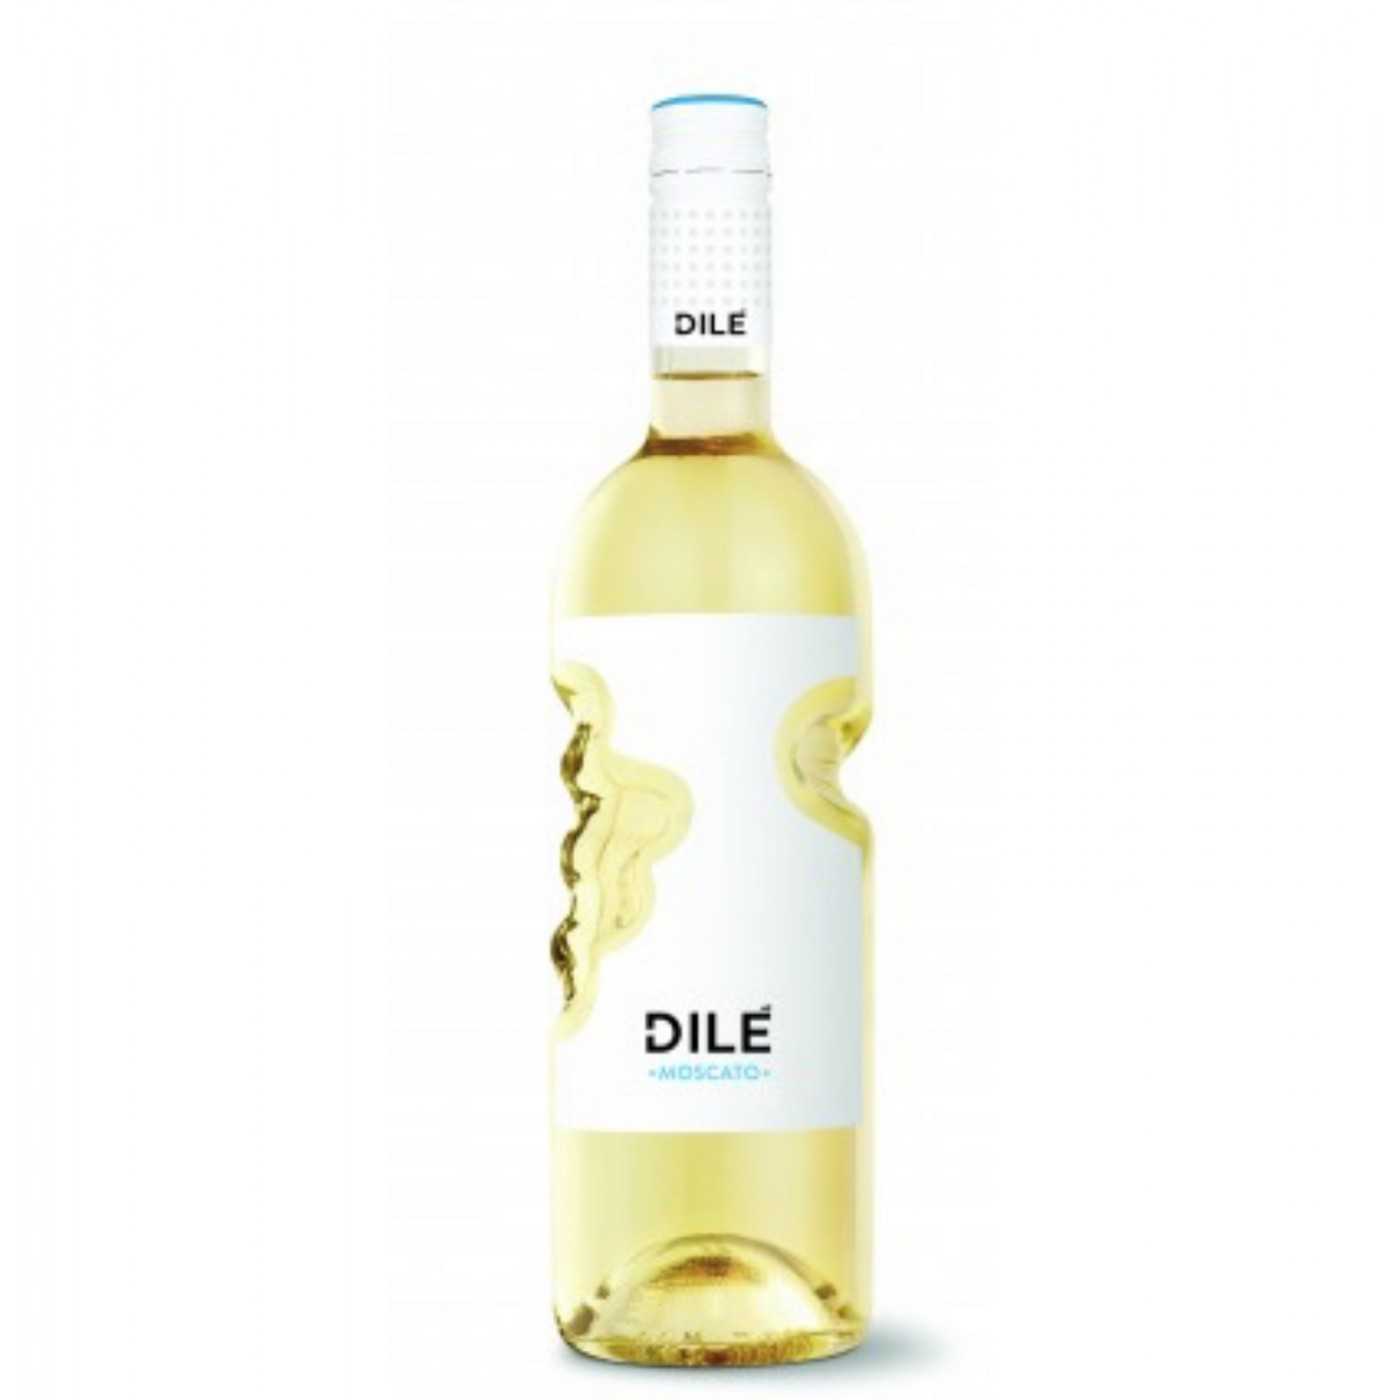 Santero Dile' D moscato 5% sweet fizzy cocktail 6fl